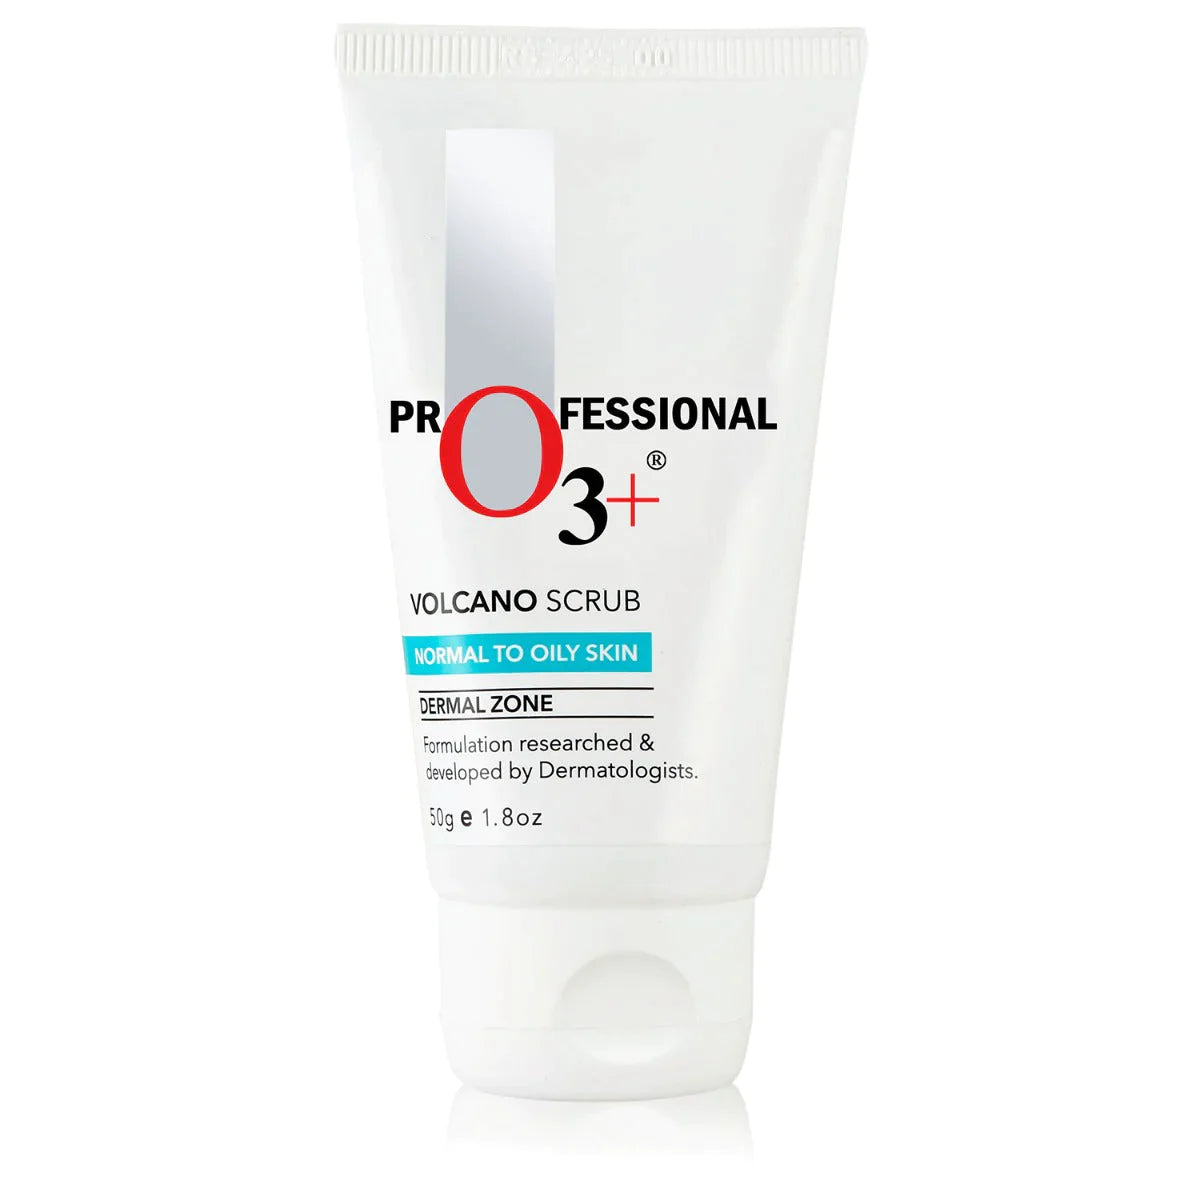 O3+ Volcano Scrub For Exfoliation, Deep Cleansing, And Pore Minimization (50g) Face Scrub from O3+